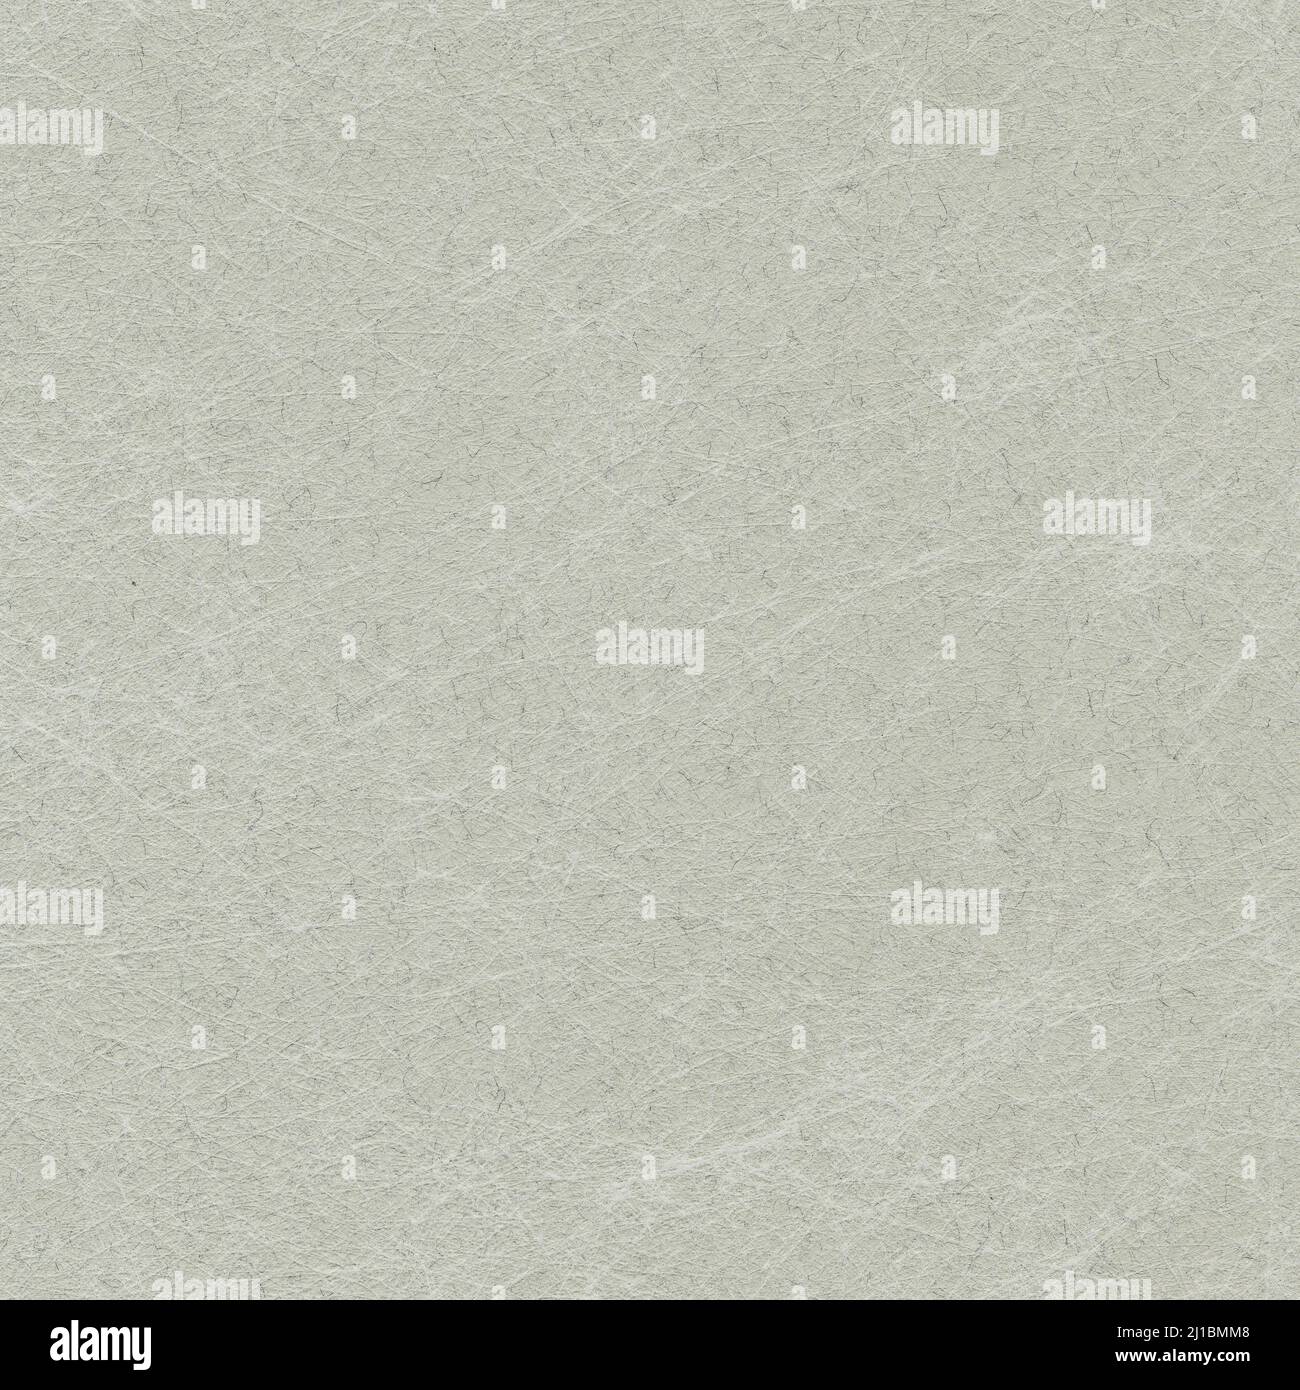 Grey paper background with white pattern Stock Photo